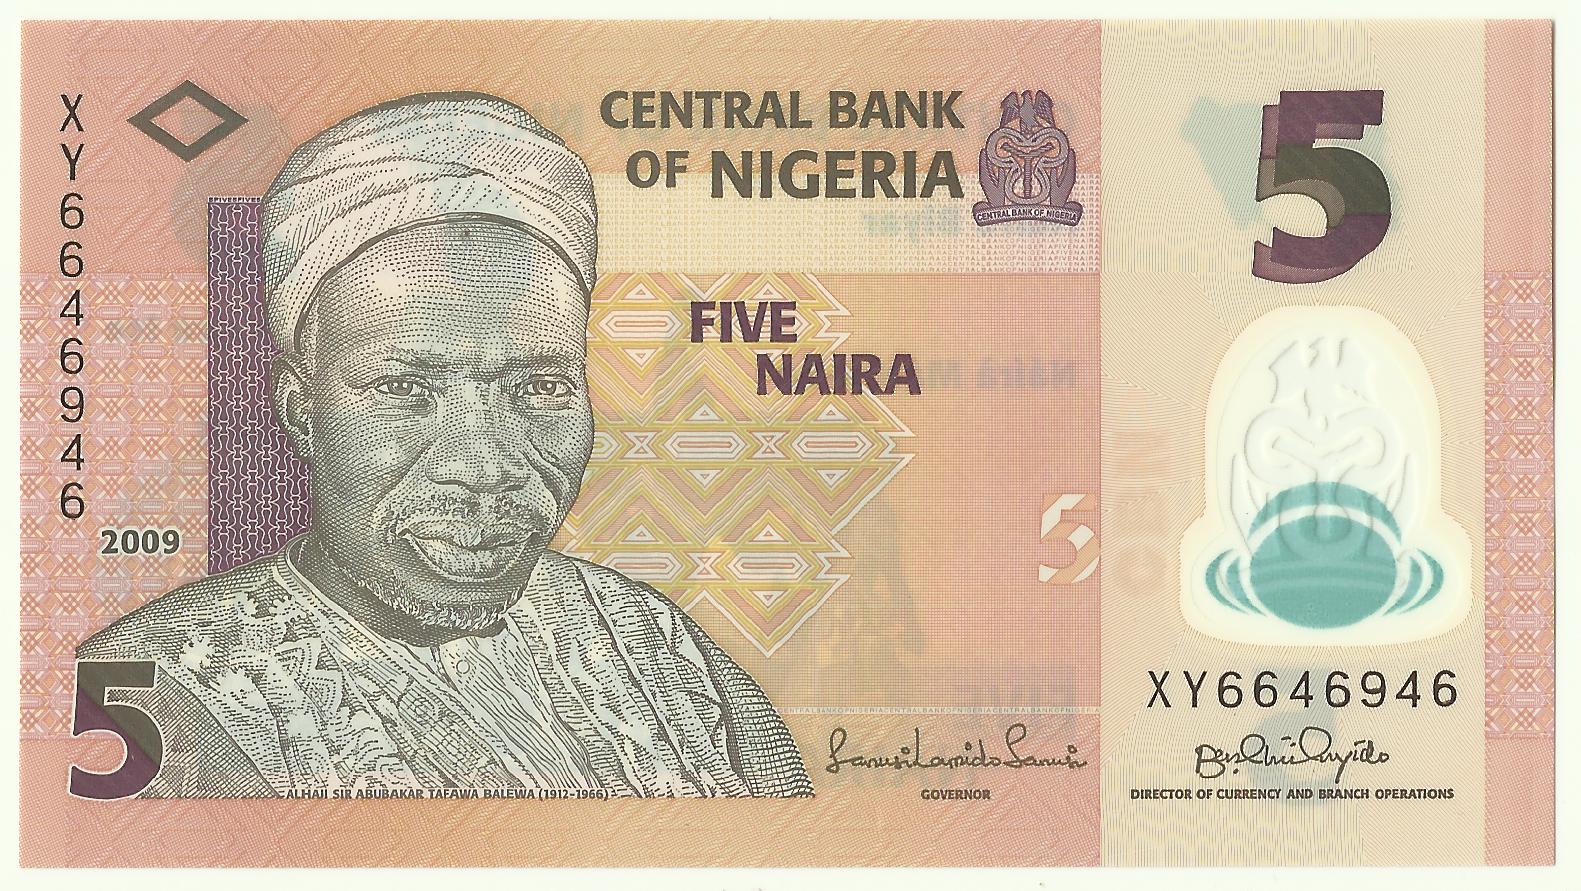 South African Currency Exchange Rate To Naira In Nigeria Work. 